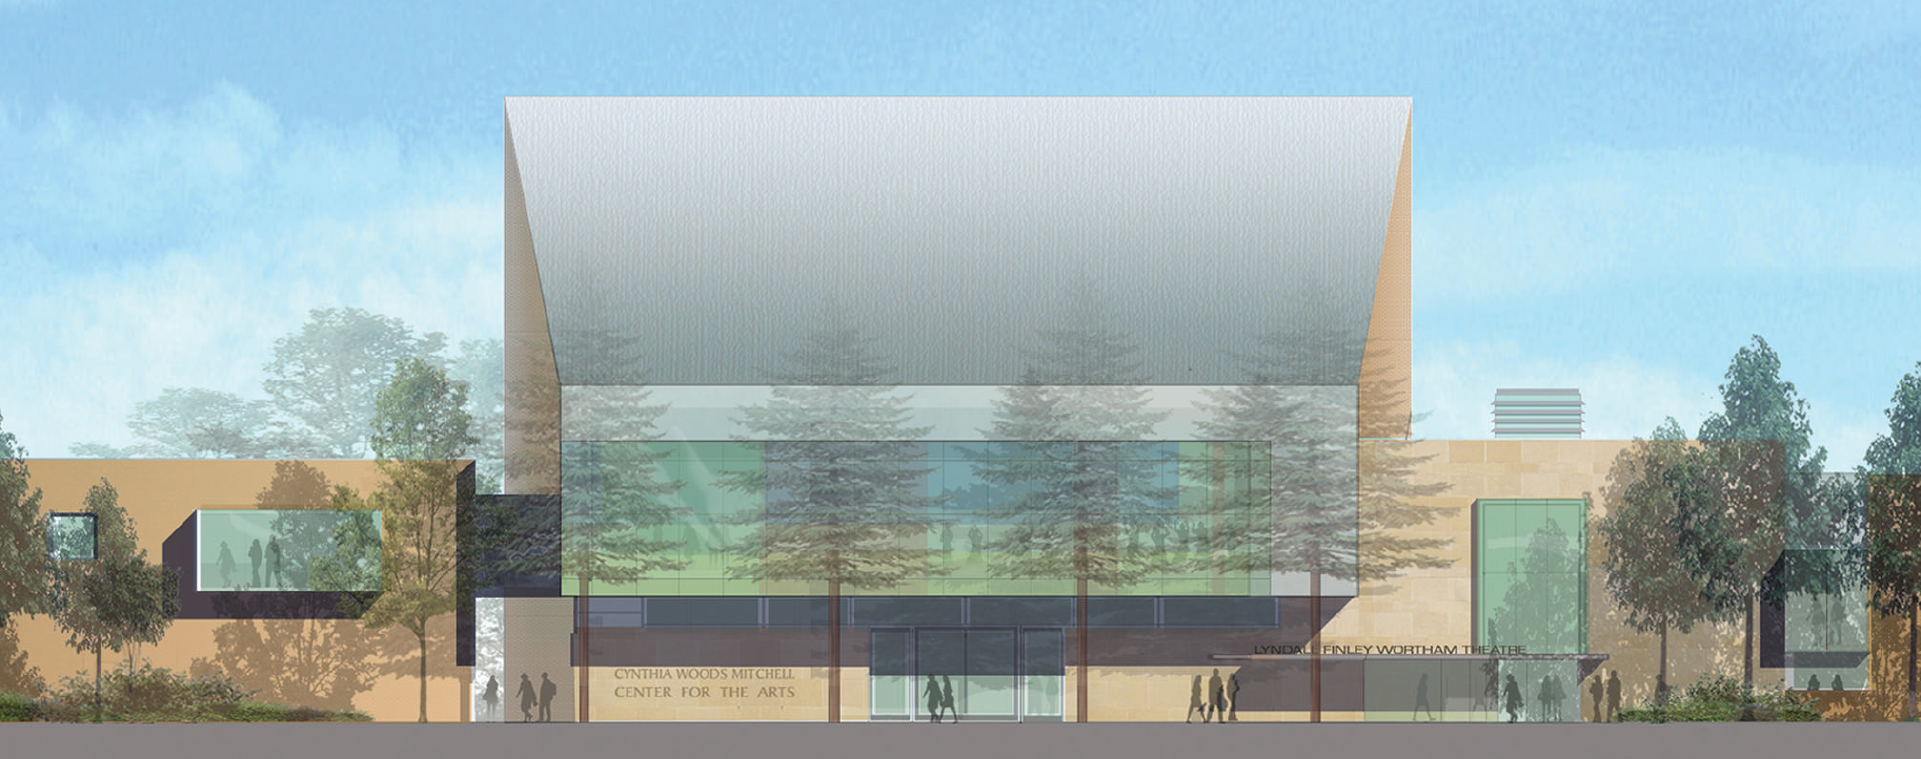 A 3D architectural rendering of the front side of the Cynthia Woods Mitchell Center for the Arts building.